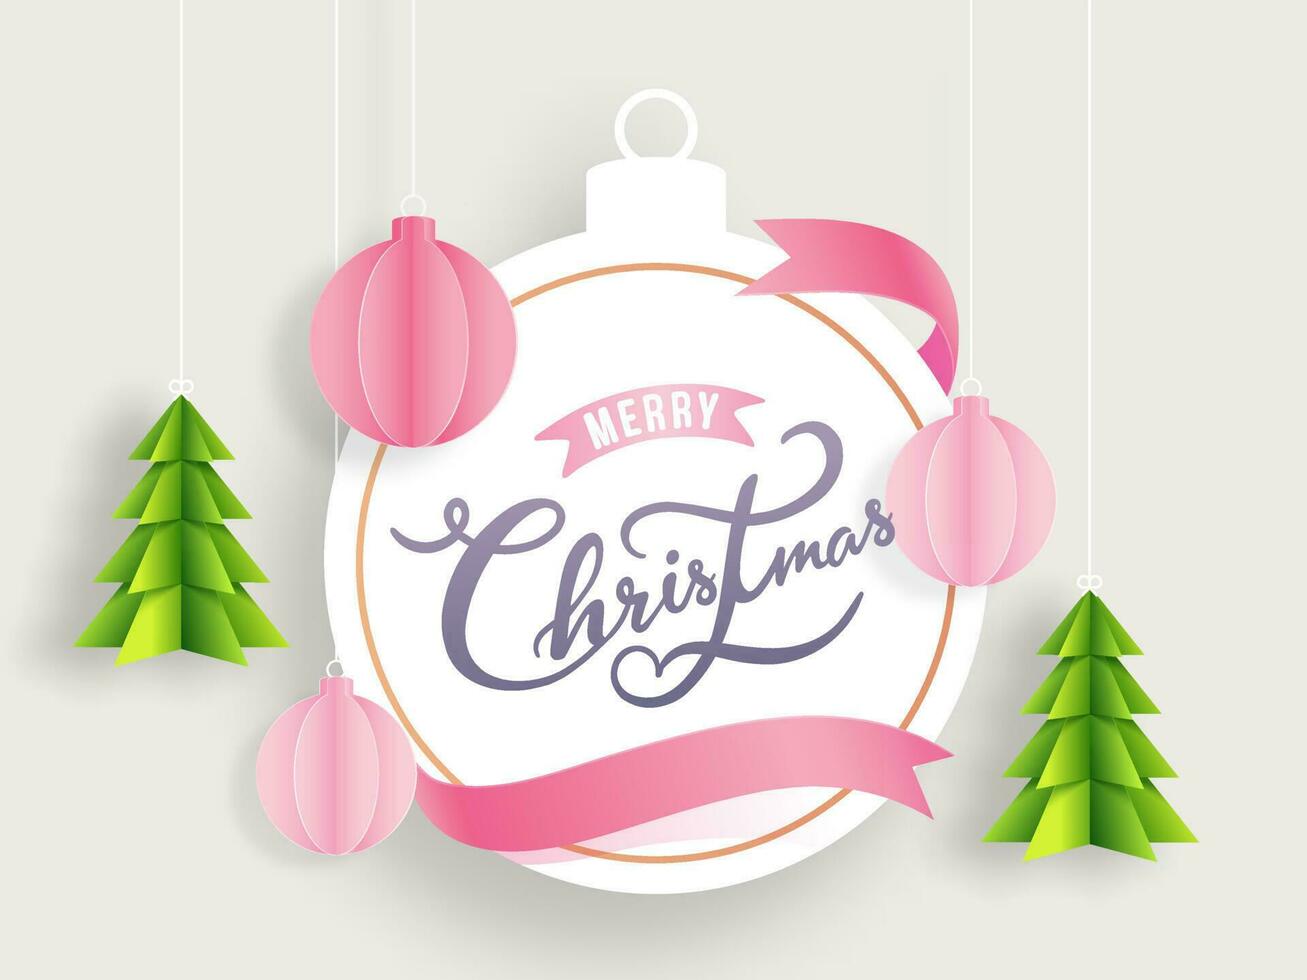 Calligraphy Merry Christmas text in bauble shape frame decorated with paper cut Xmas tree and ornament balls on white background. Can be used as greeting card design. vector